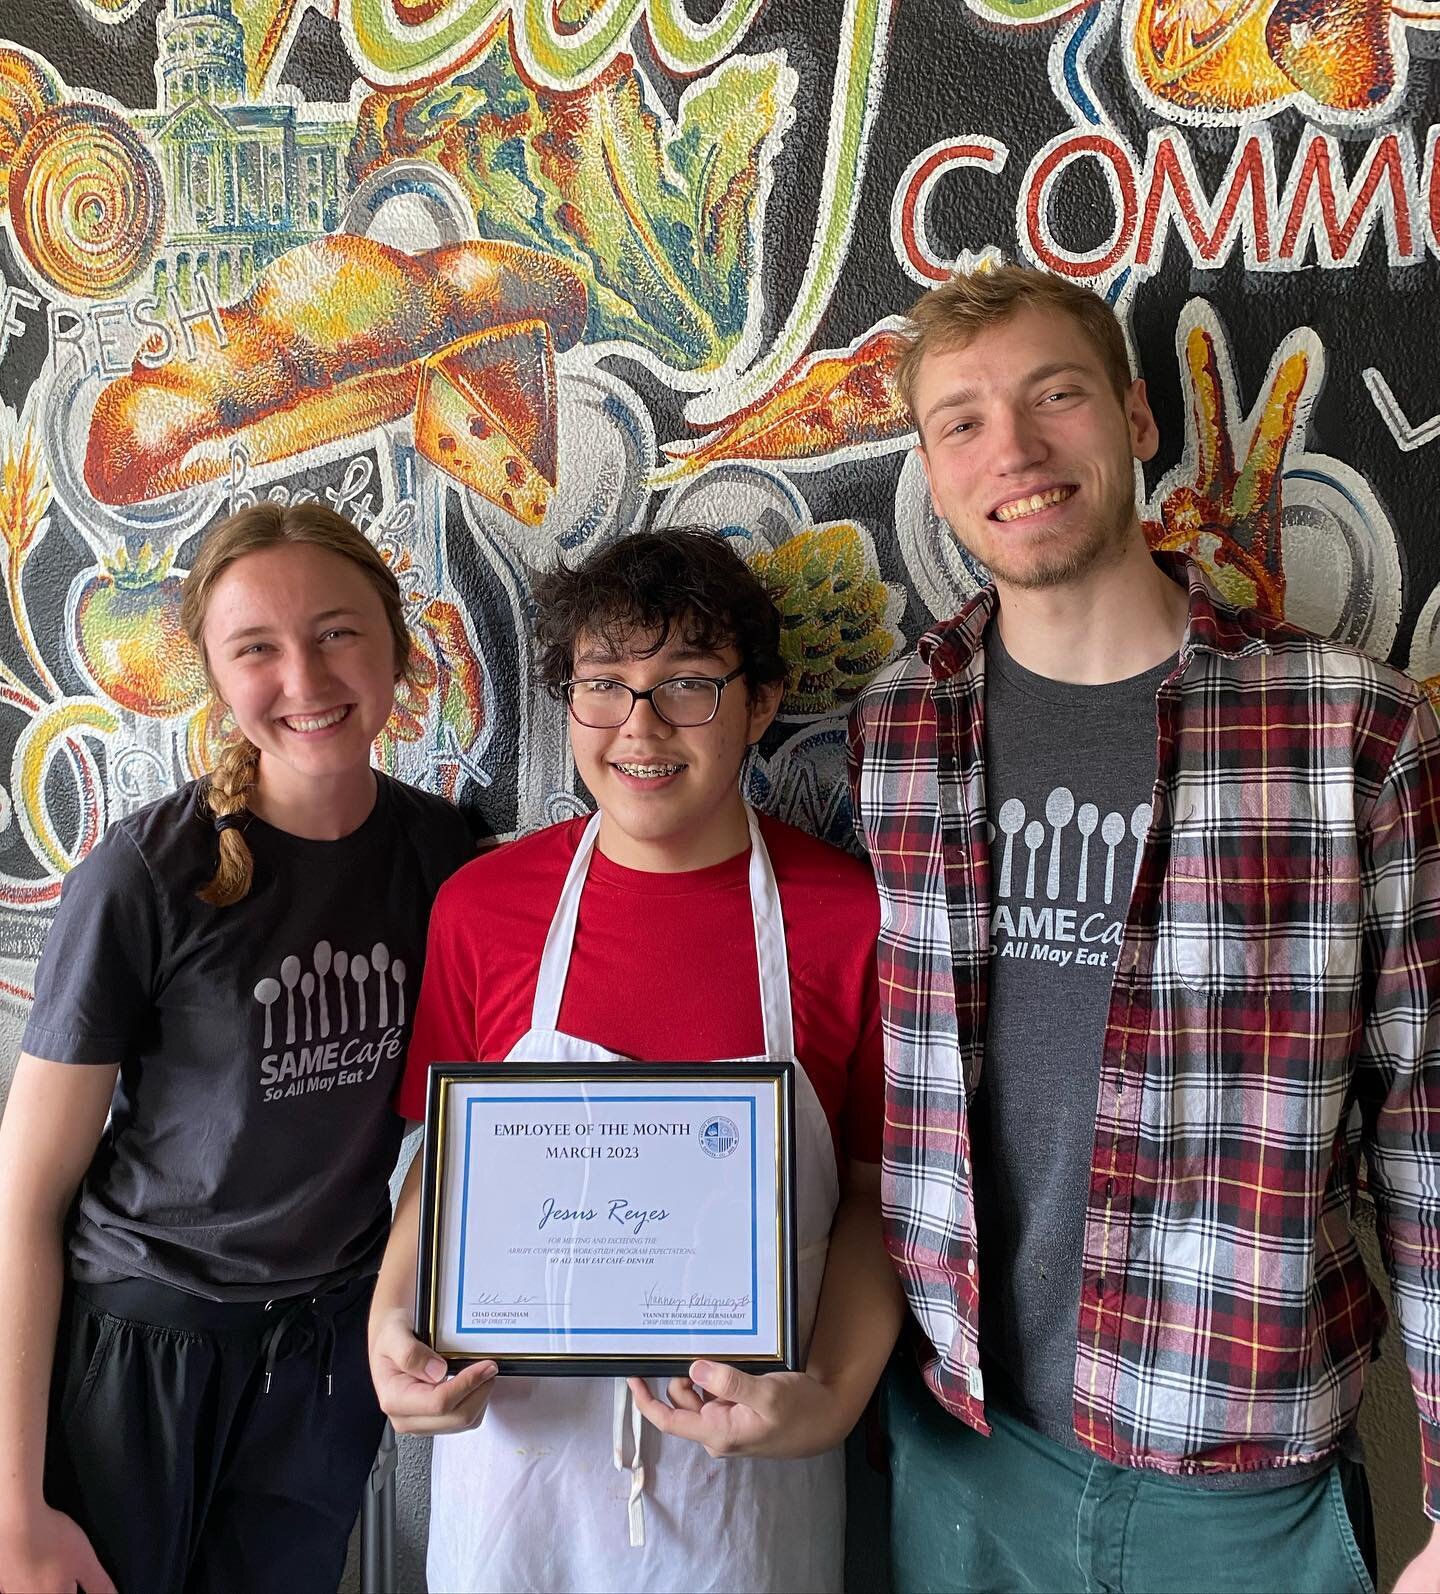 BIG shoutout to Jes&uacute;s, one of our Arrupe Jesuit High School interns, for being awarded Employee of the Month! 

His dedication to our space is so impressive, and he keeps our team smiling with his wit. 

We are so proud of our high school inte